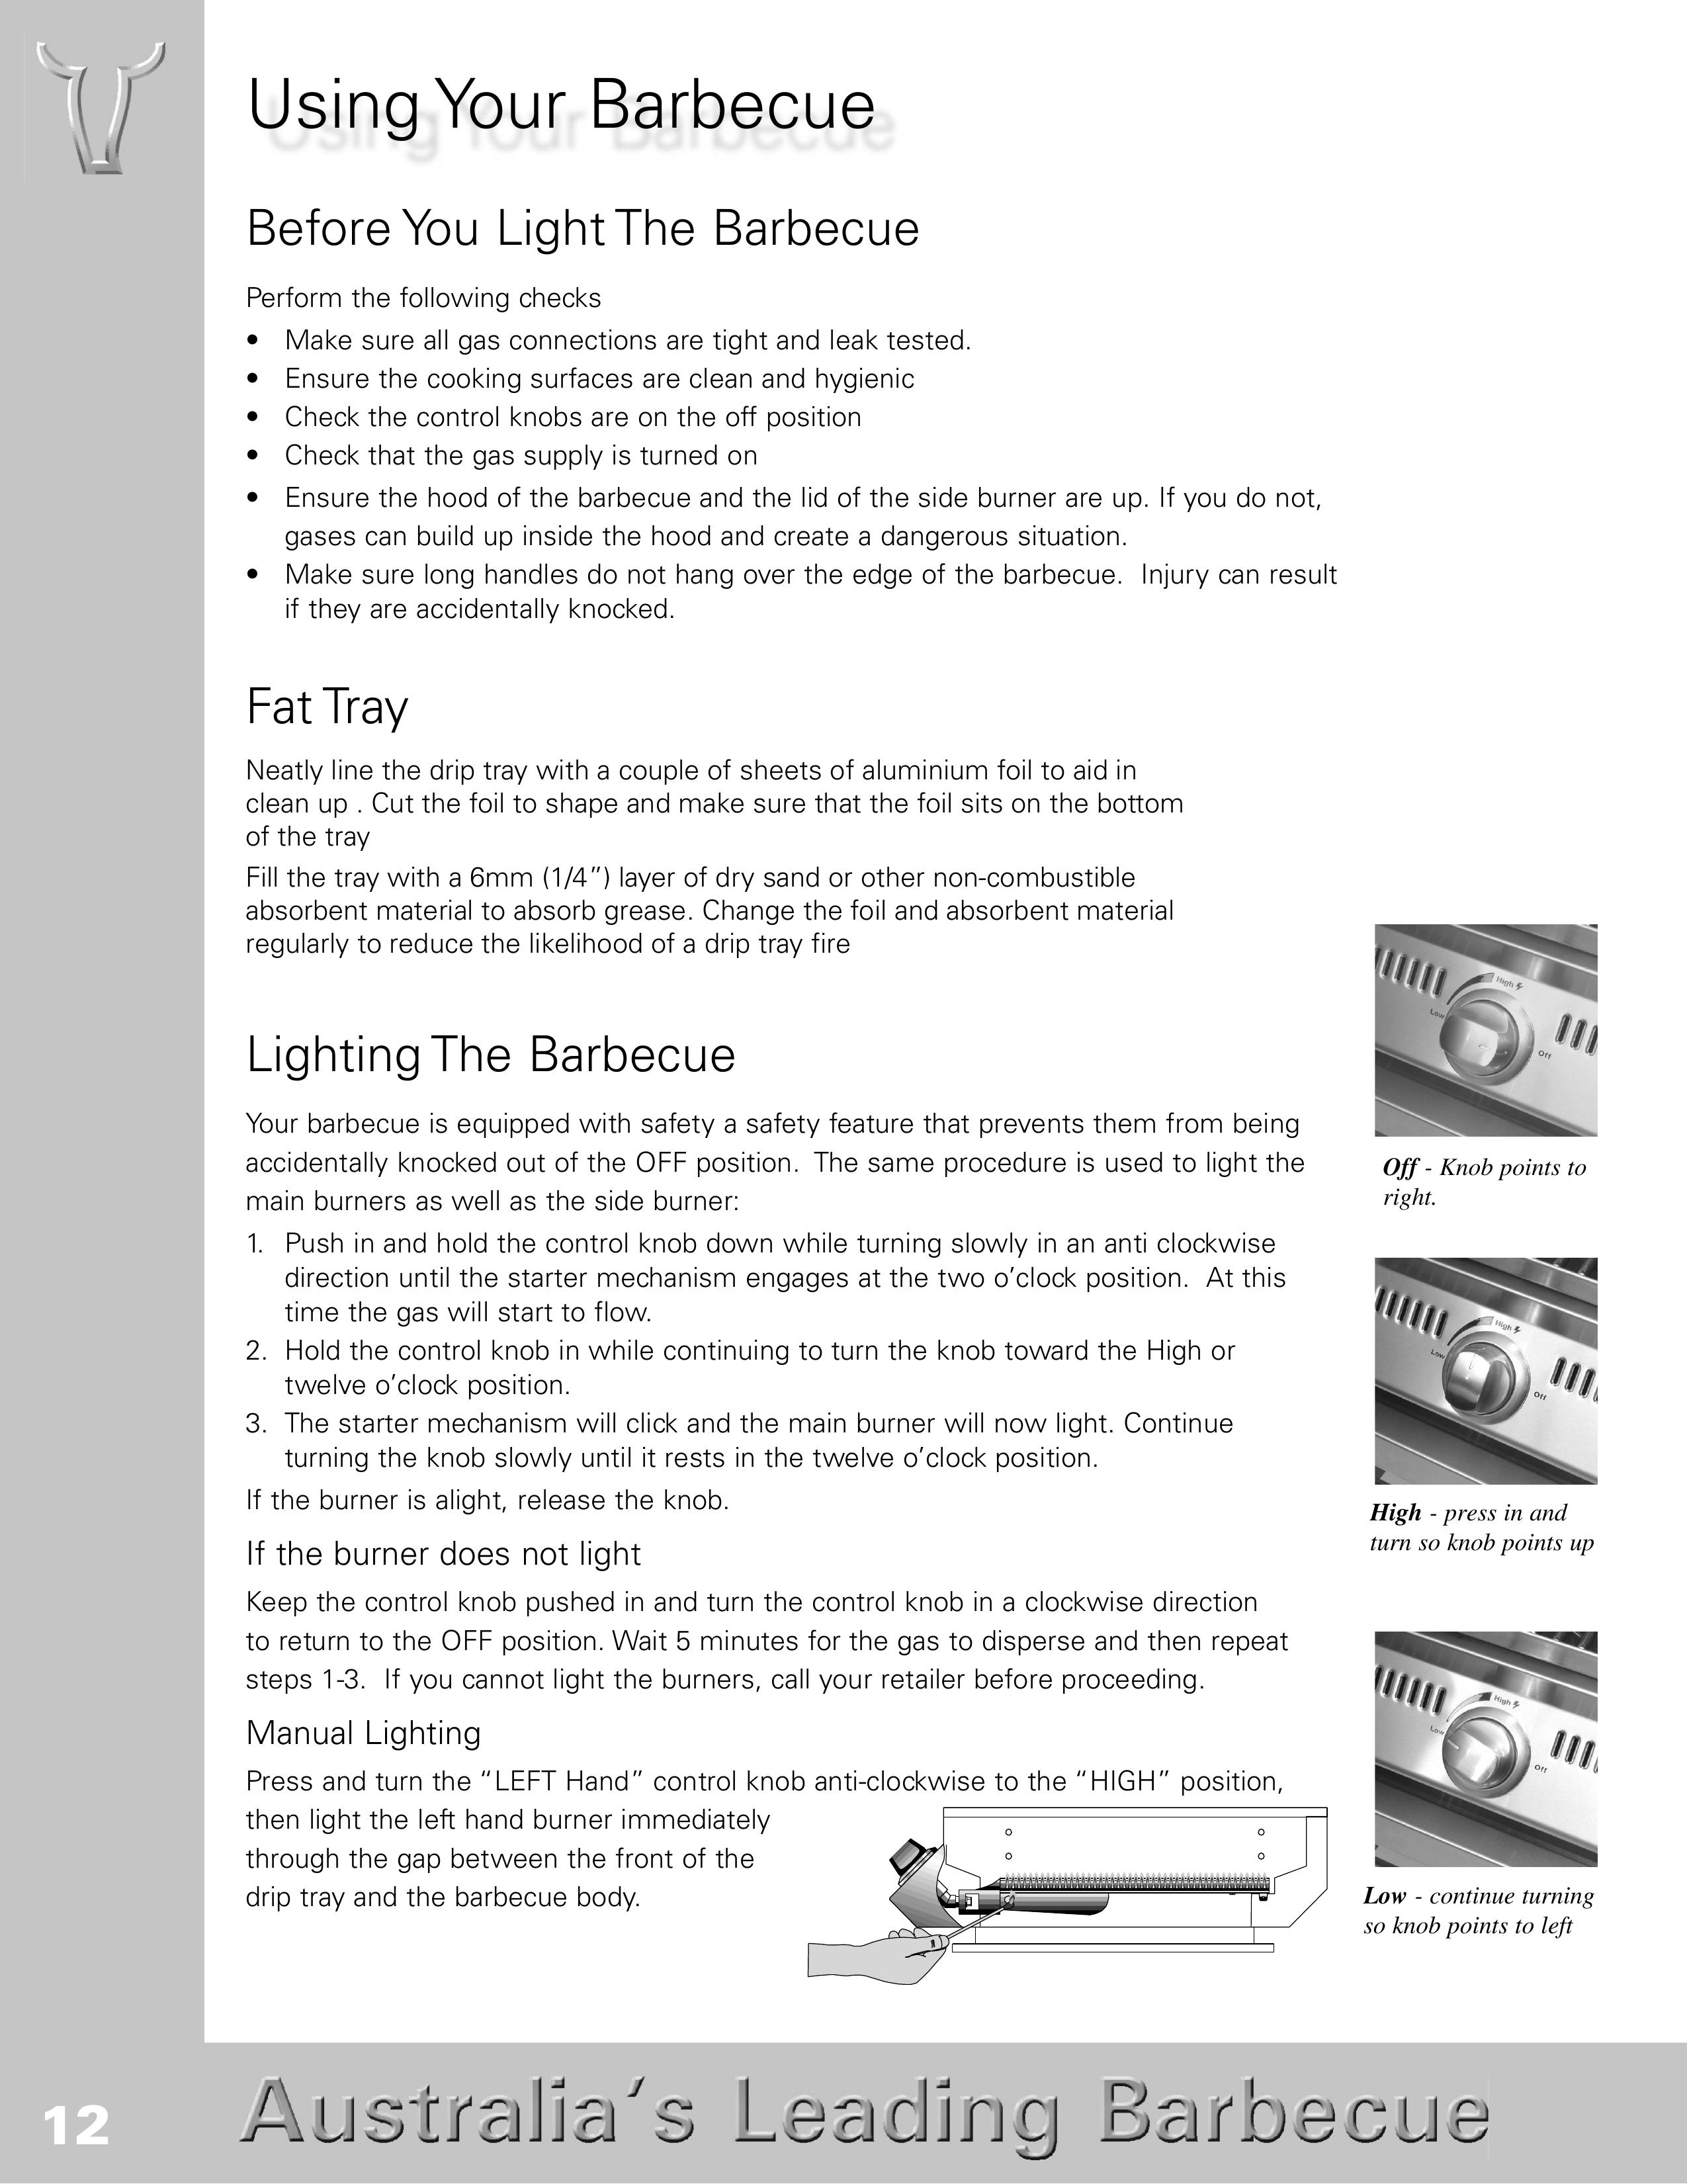 BeefEater SL4000s Charcoal Grill User Manual (Page 12)